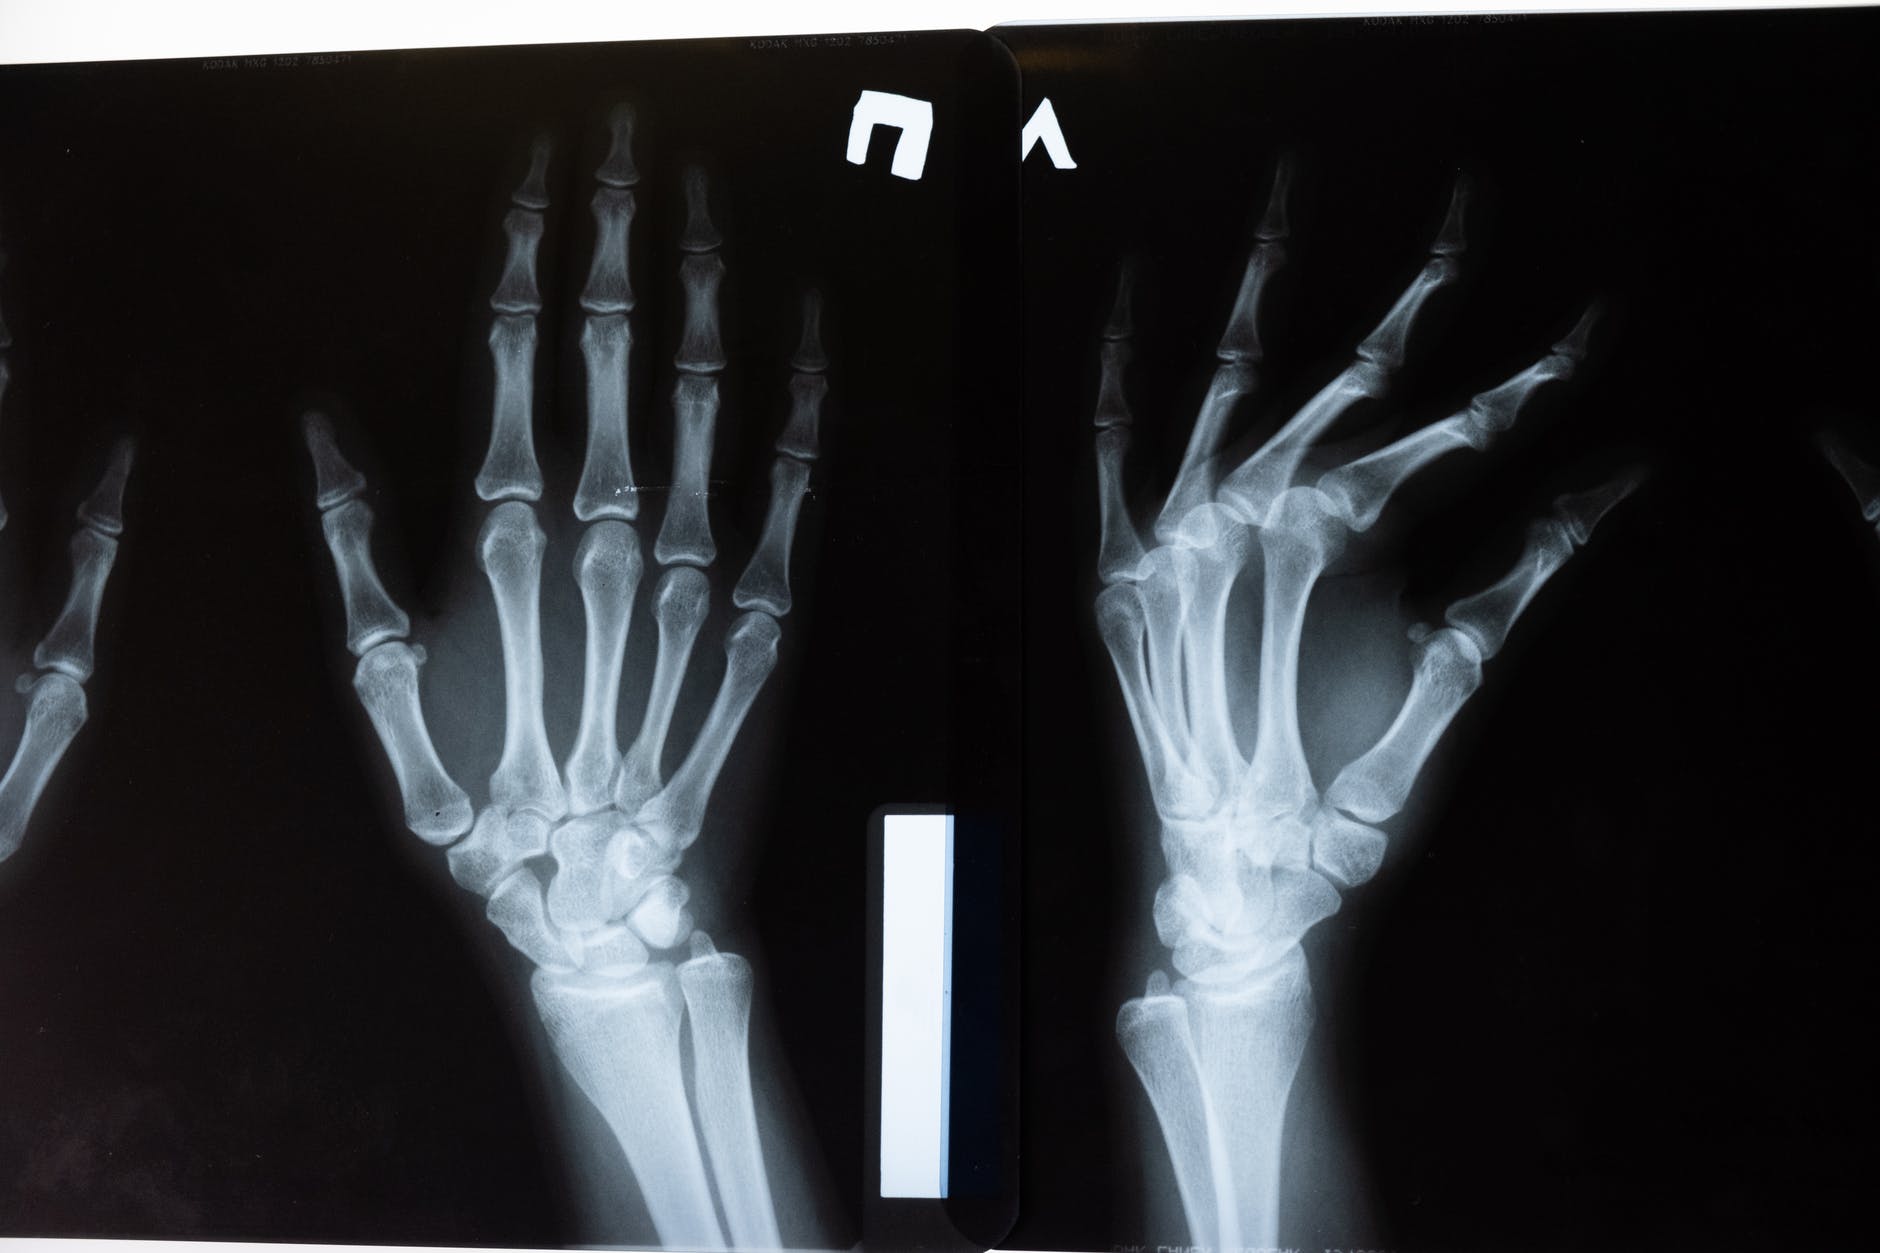 X-ray images of hands.